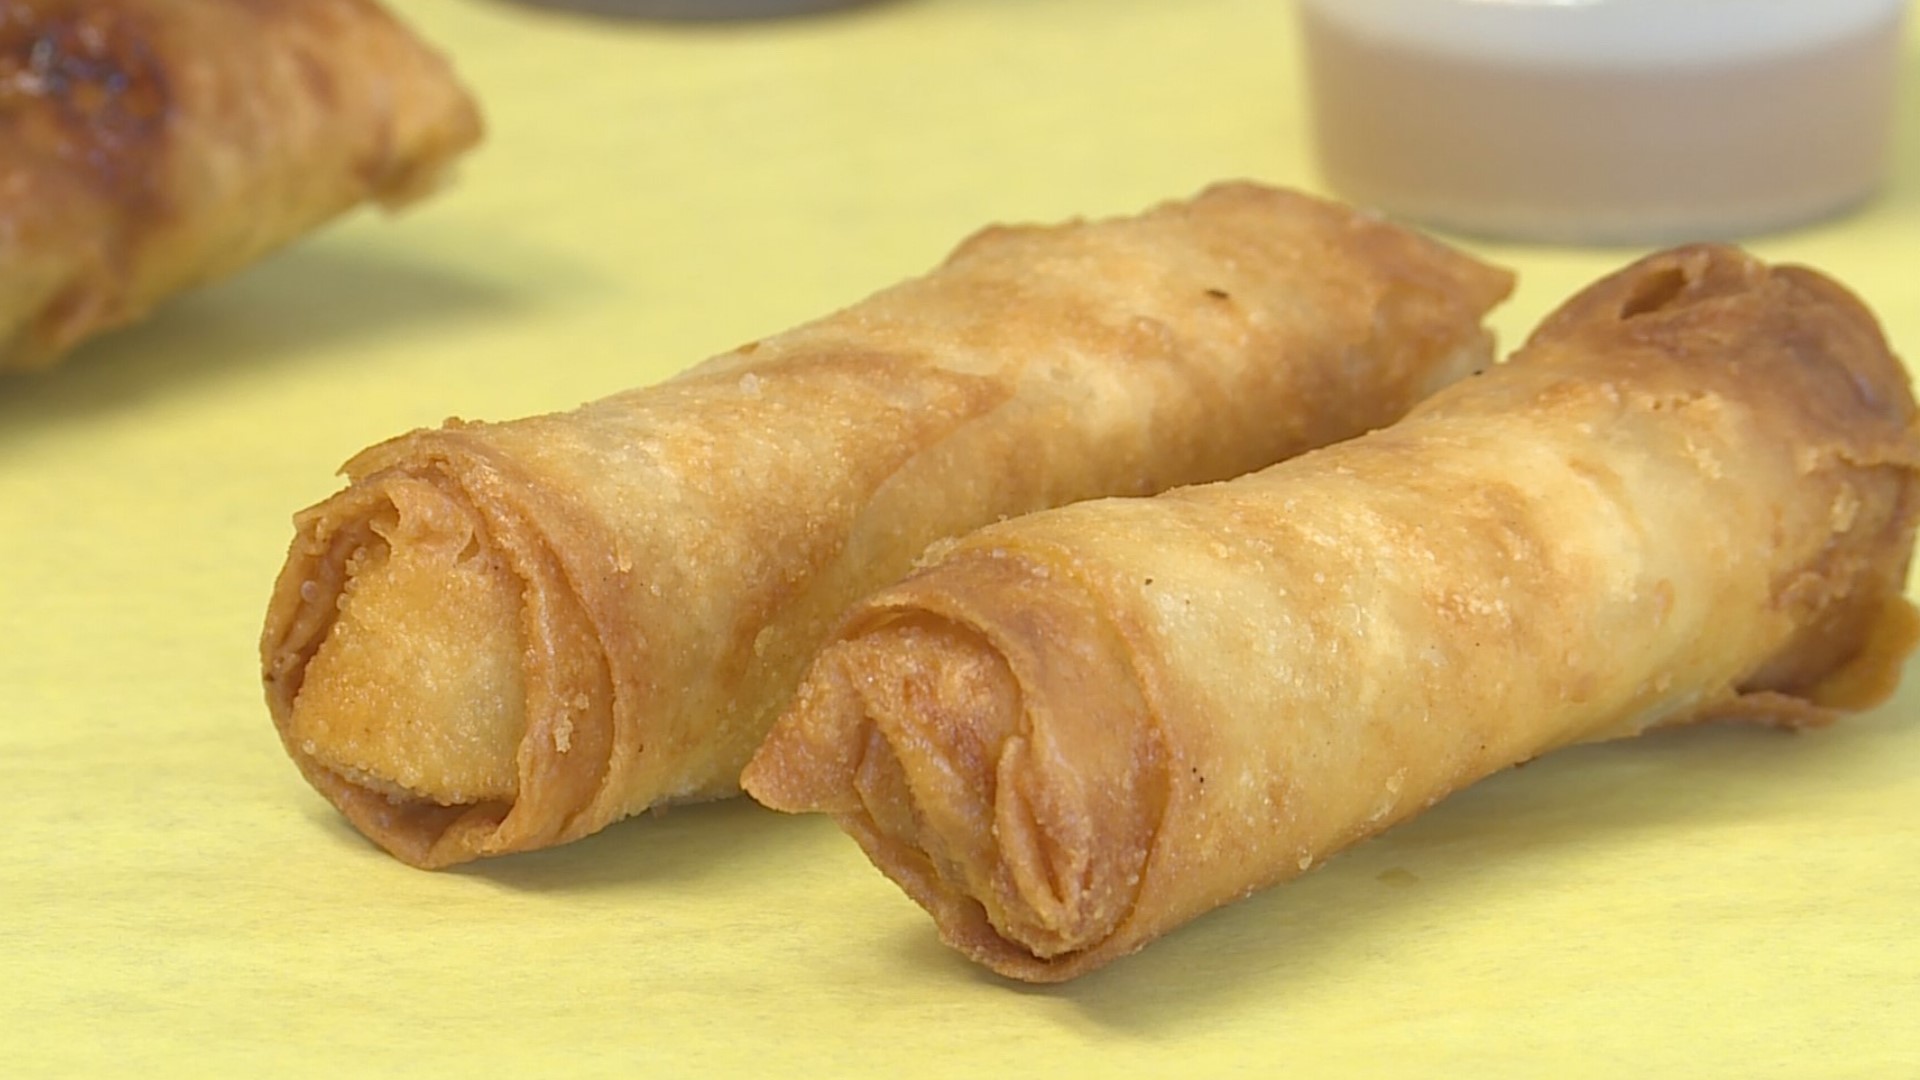 Northwest Lumpia doesn't just do lumpia- they do "fusion lumpia" - and that means you'll find unique and unexpected flavors at this bright Tacoma spot.